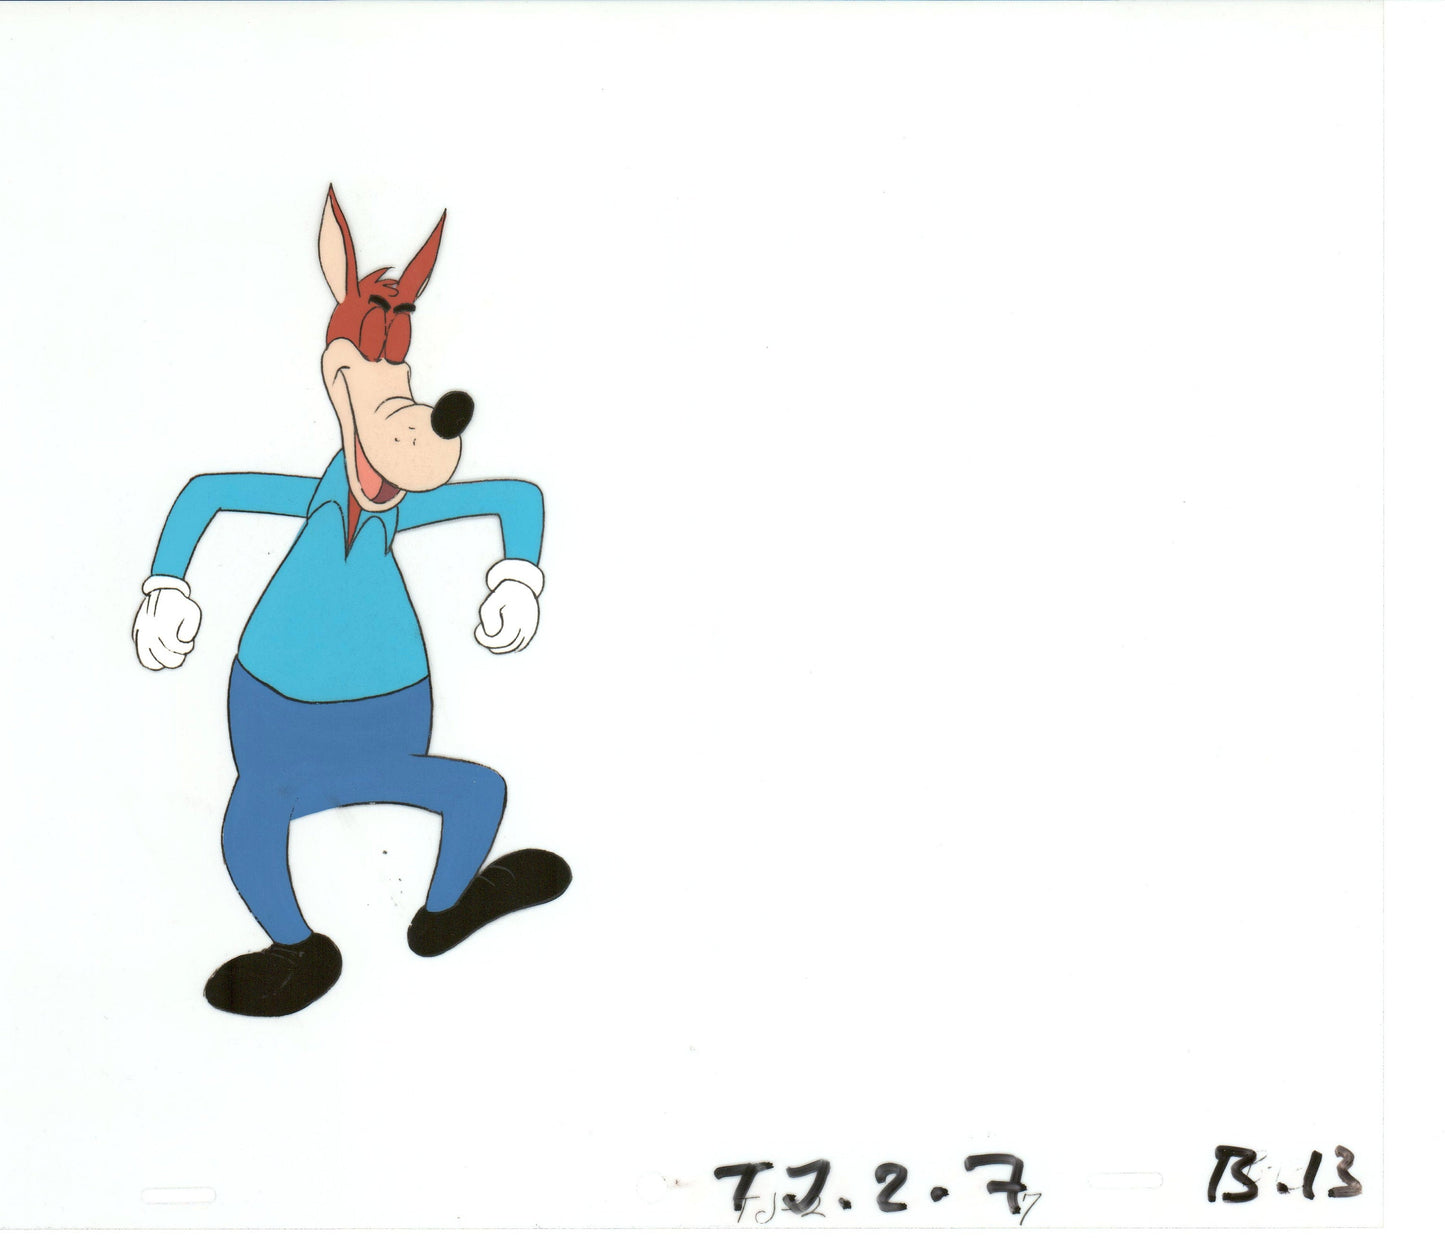 Tom & Jerry Original Production Animation Cel from Filmation 1980-82 b4374